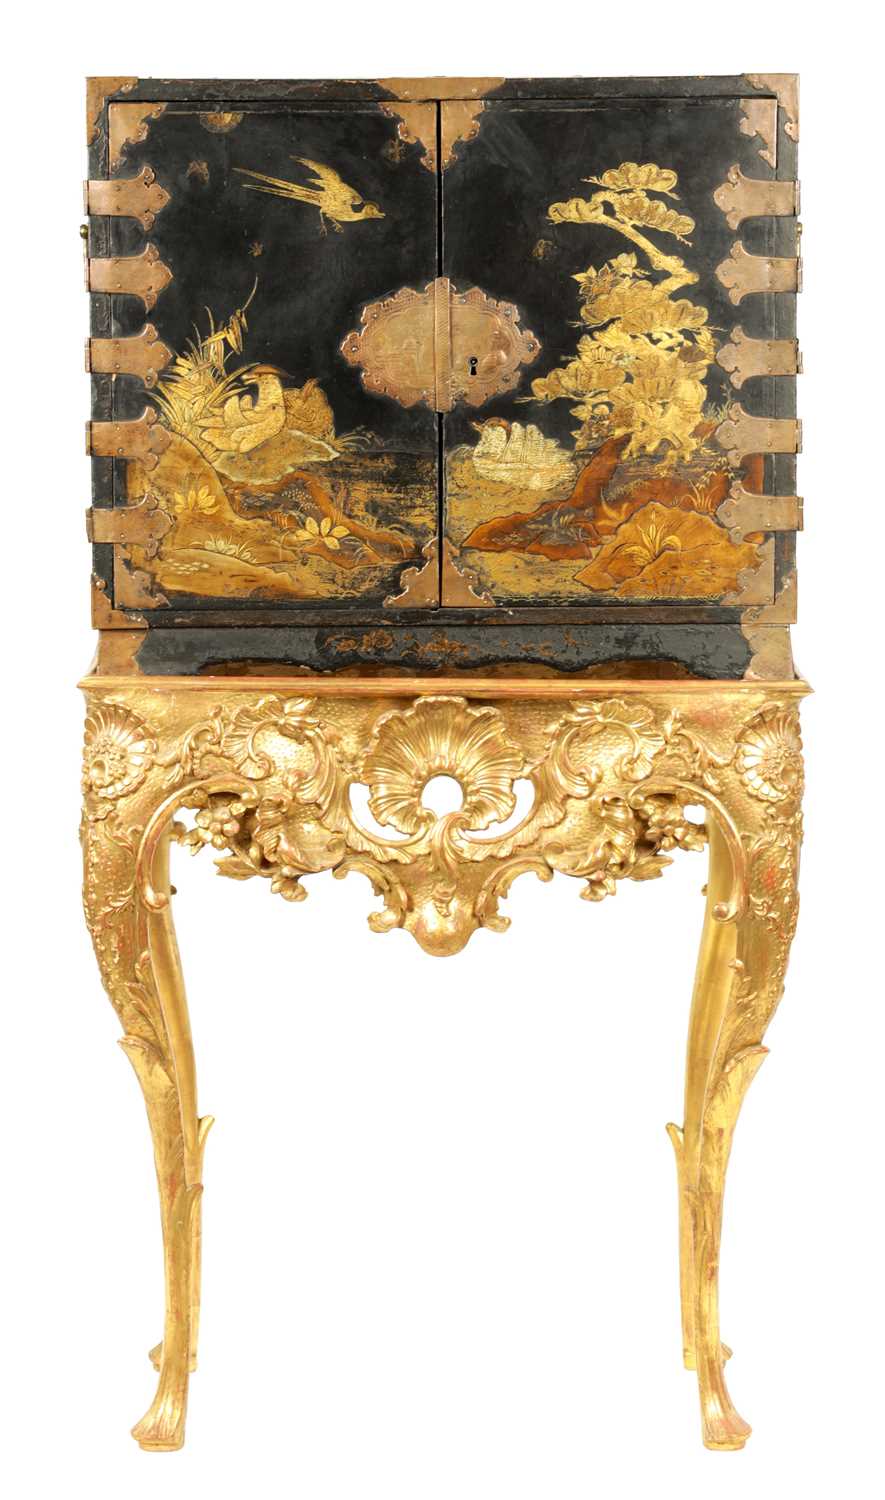 Lot 960 - A GEORGE III CHINOISERIE DECORATED LACQUERWORK COLLECTORS CABINET ON GILT WOOD CARVED STAND